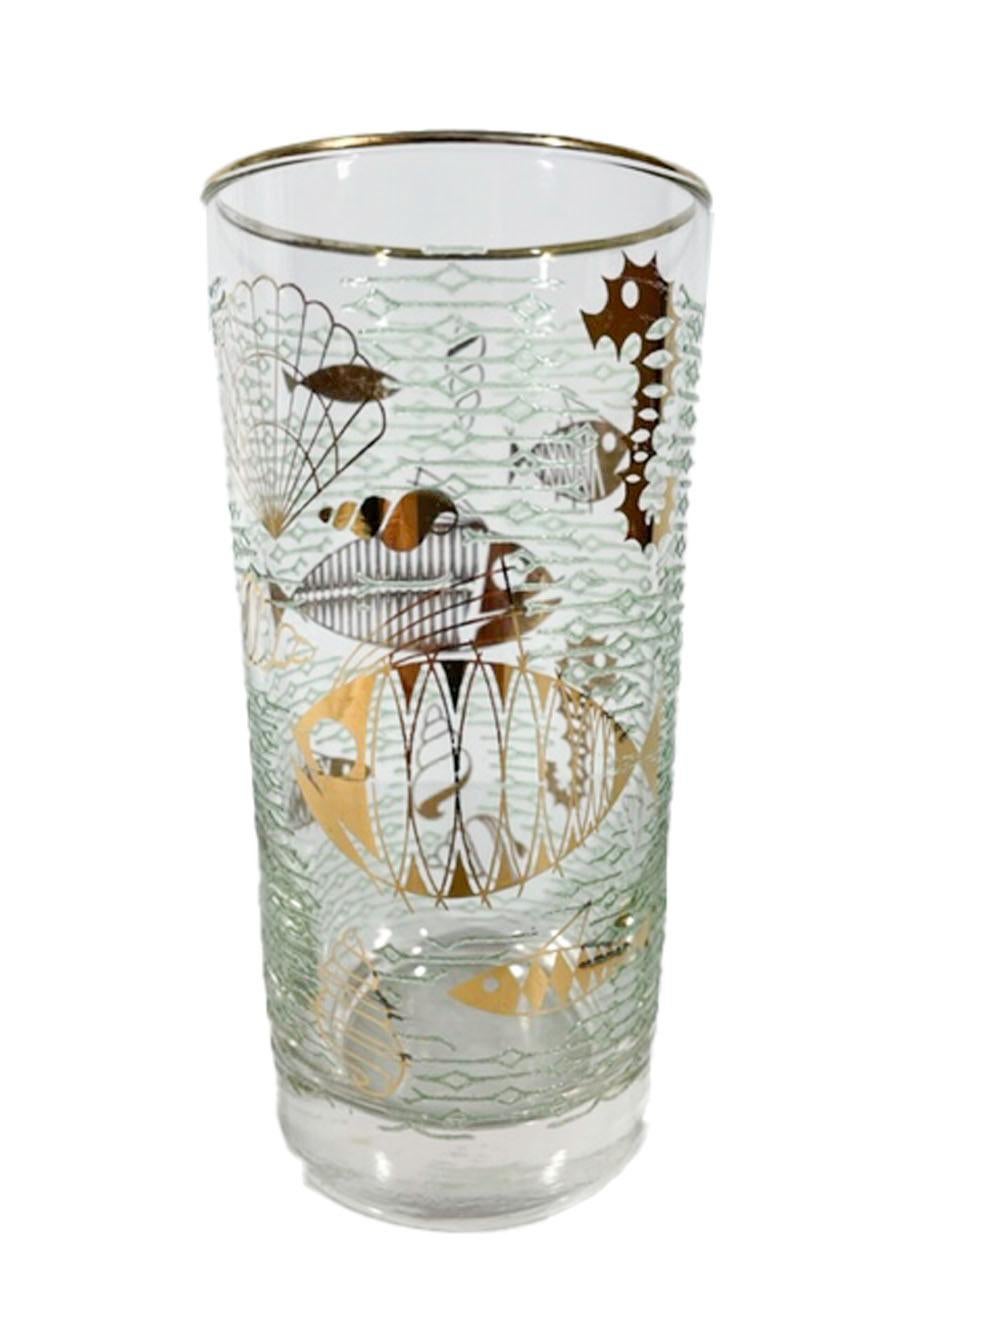 American 6 Libbey Glass Highball Glasses in the Marine Life Pattern For Sale